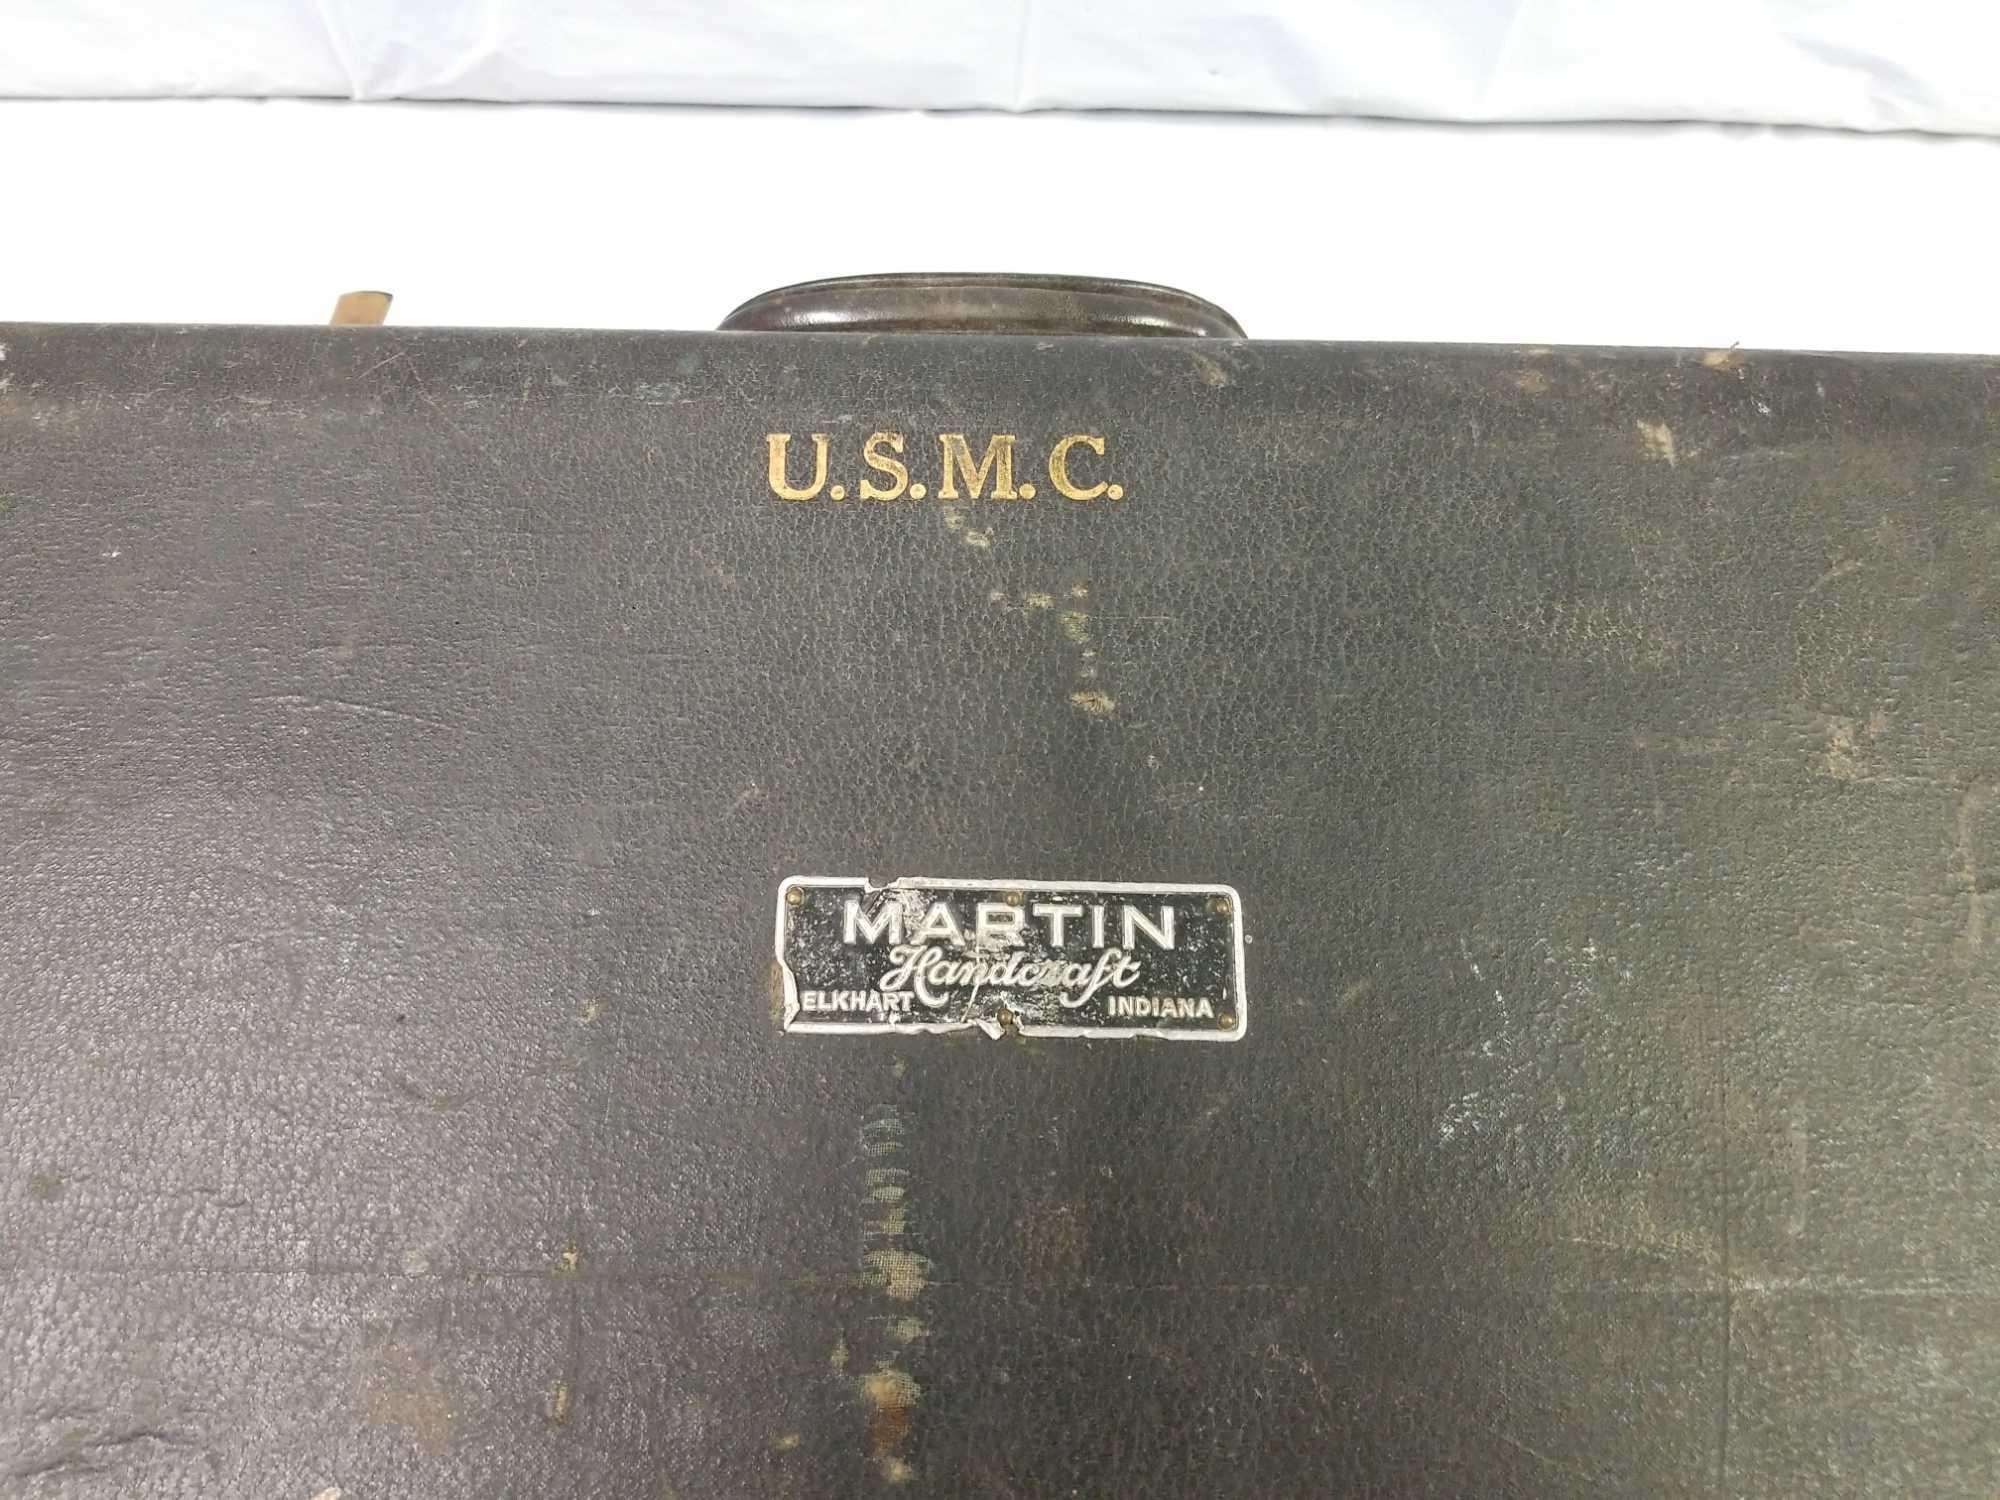 Martin Standard United States Marine Corps trumpet/cornet that appears to be in good condition.